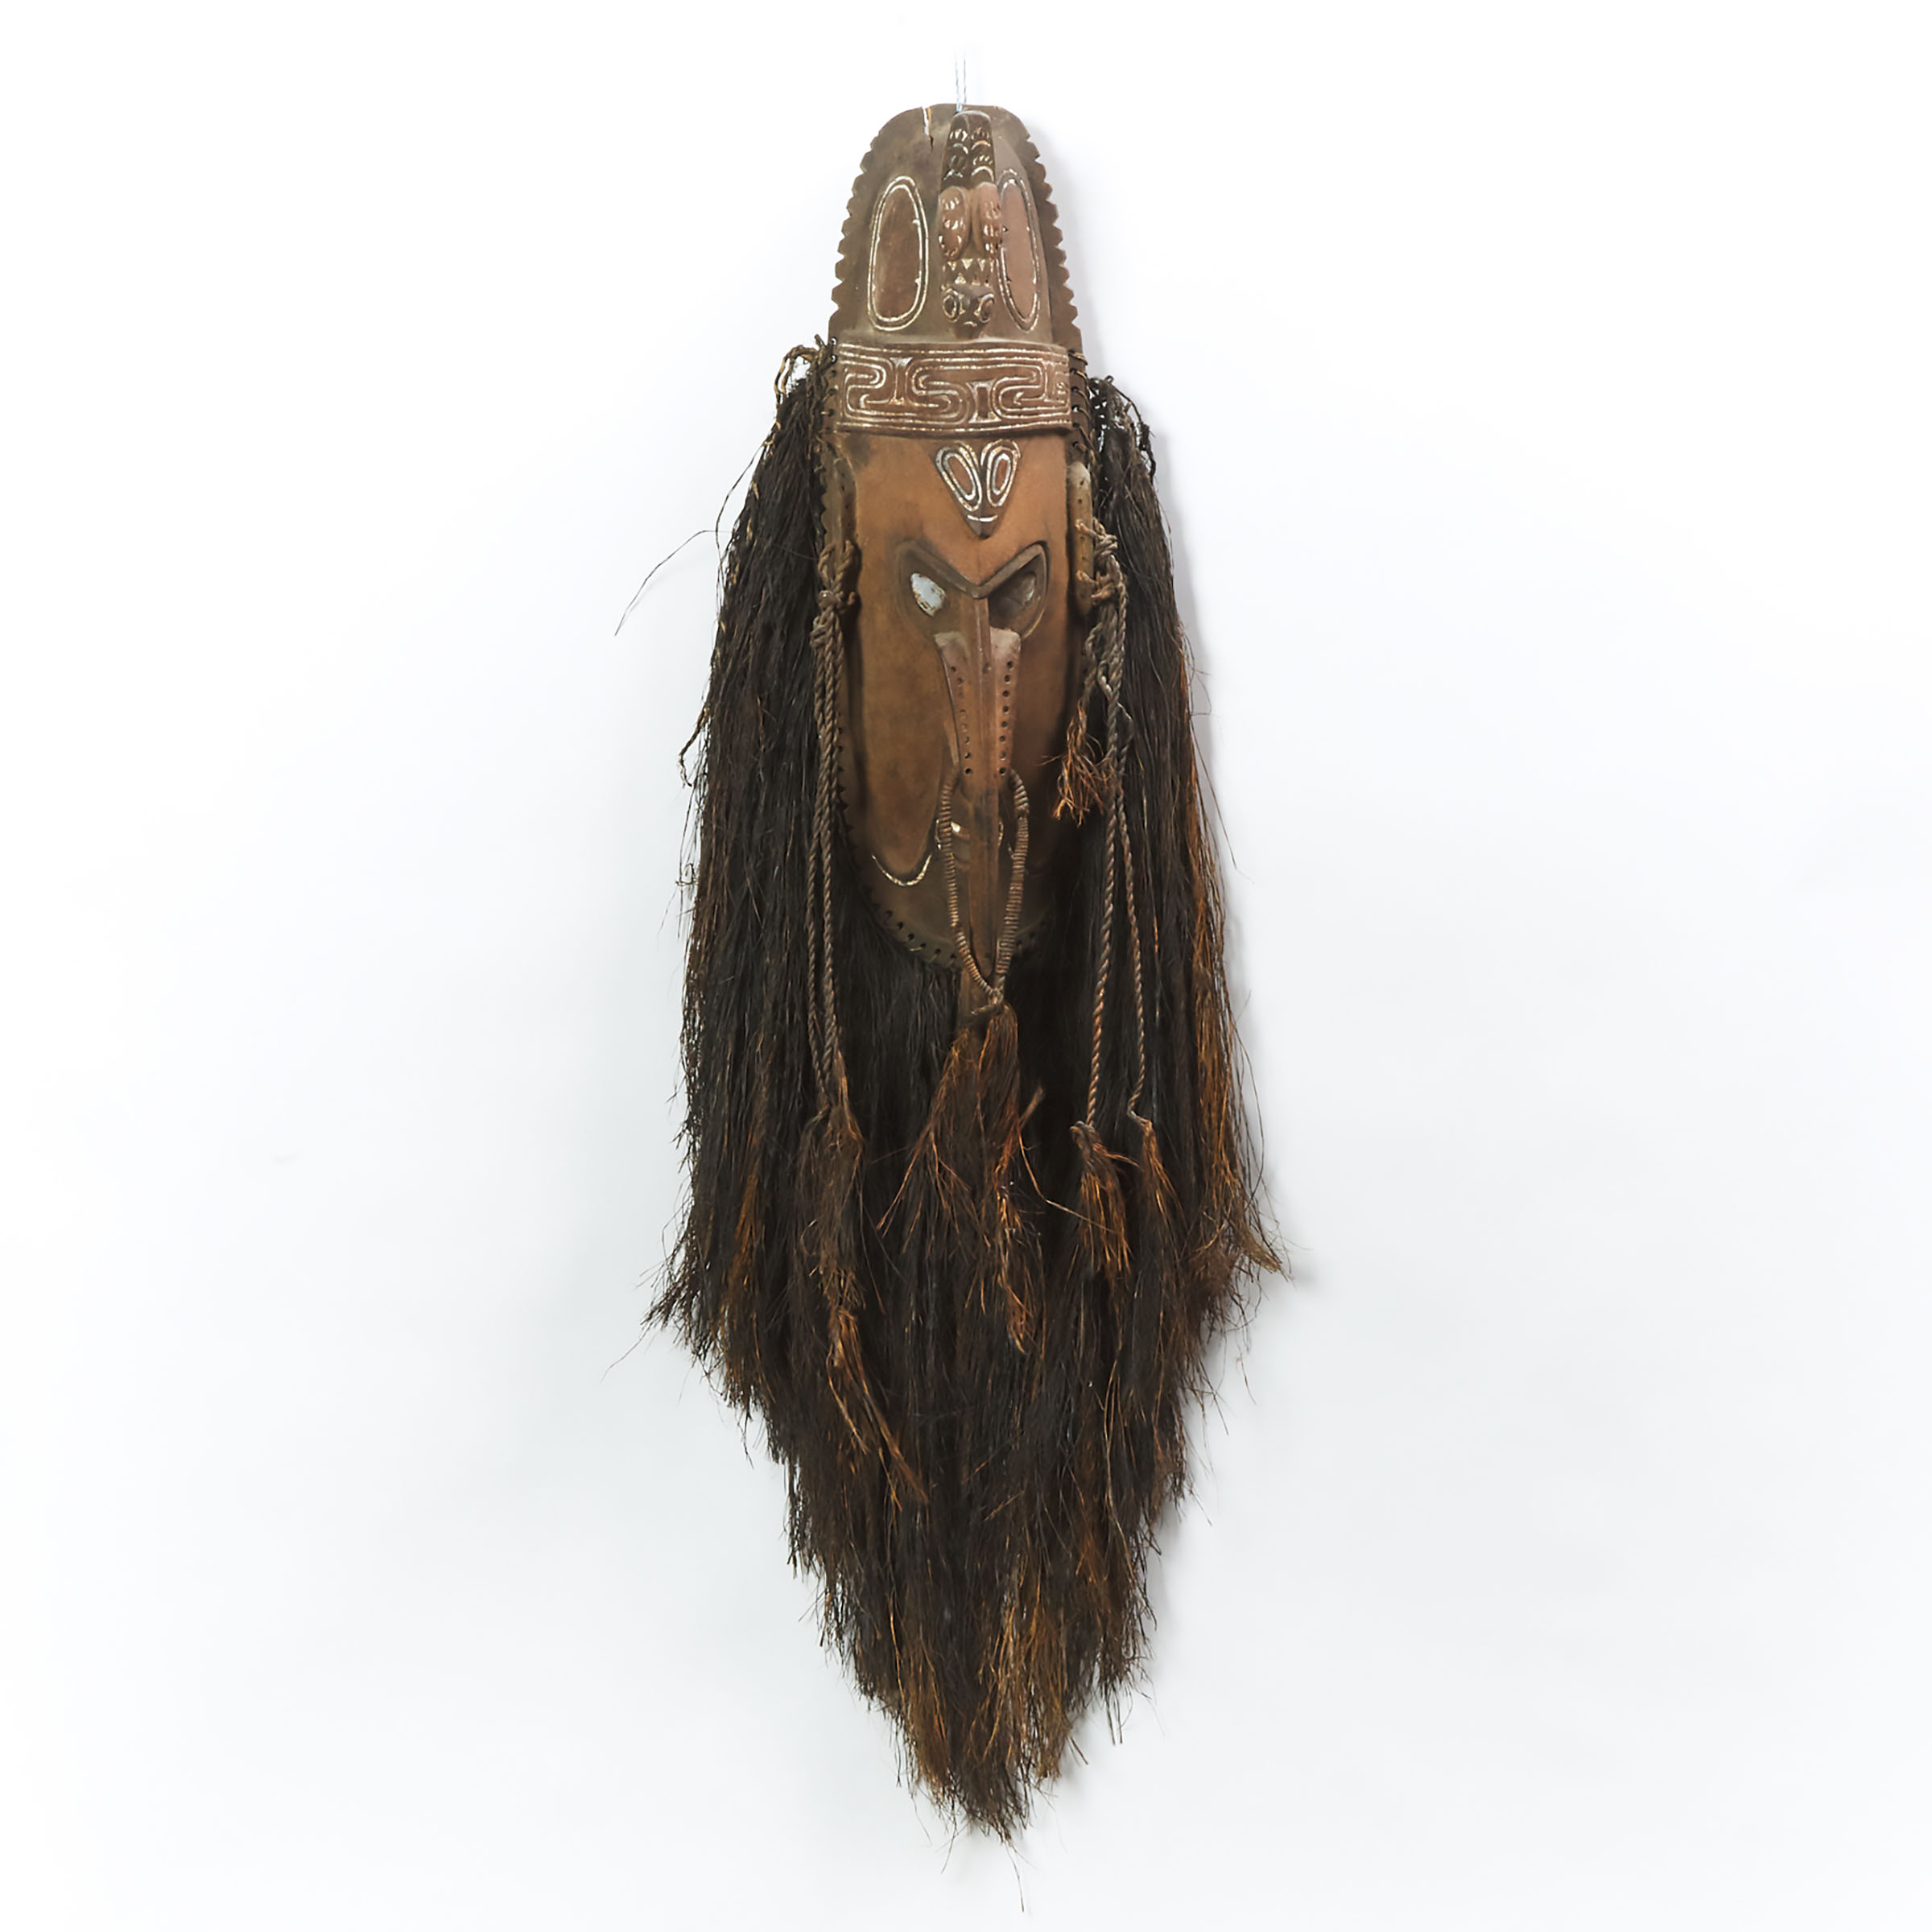 Sepik River Mei Mask, Papua New Guinea, early to mid 20th century